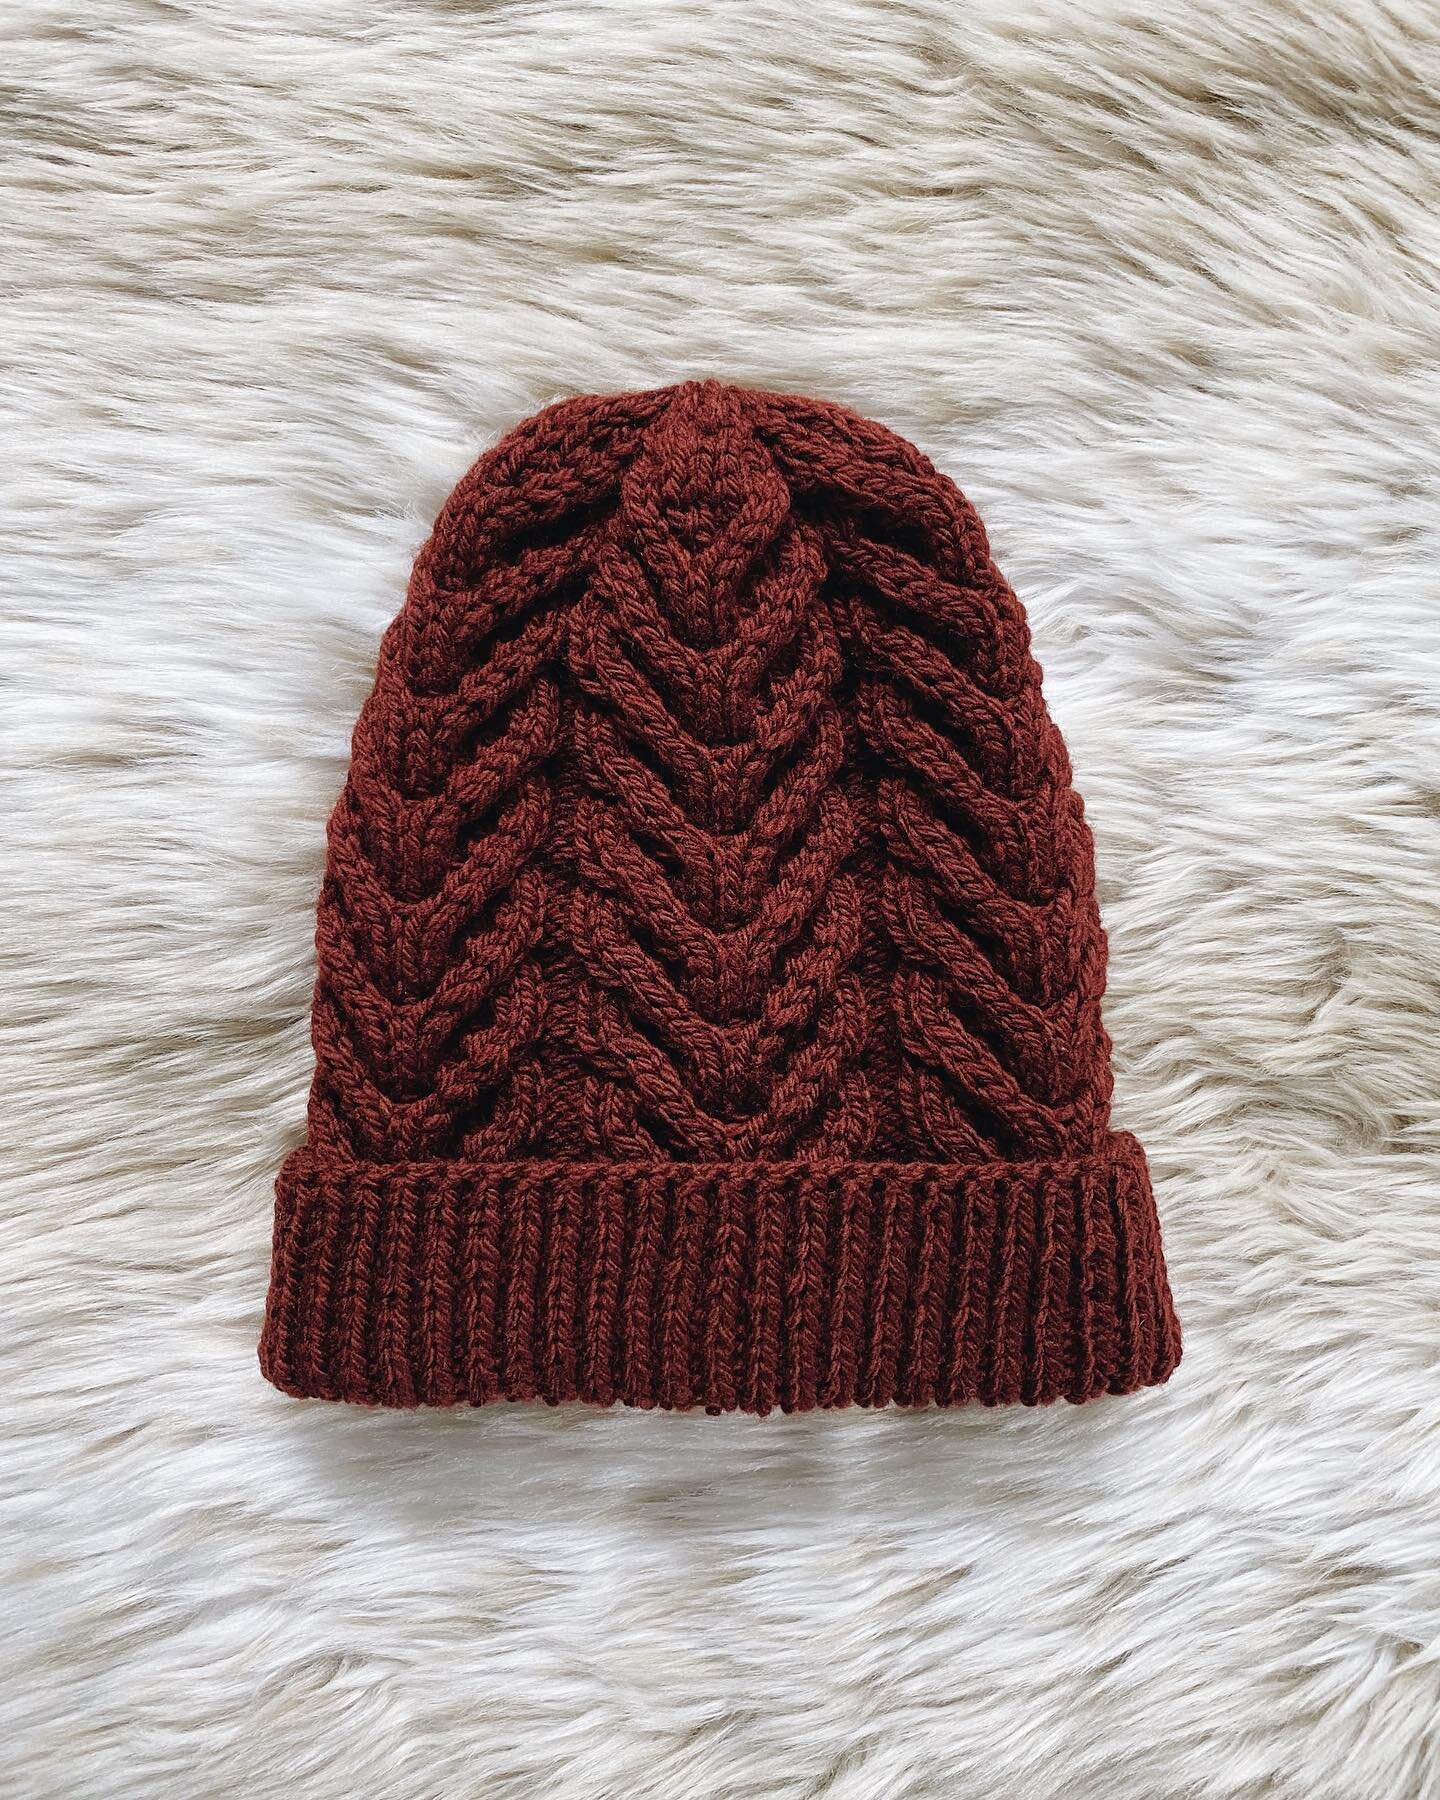 Still making this hat on repeat... this one for @jess_wi might be my favorite color so far! 💝

Pattern: &ldquo;Antler Toque&rdquo; by @tincanknits
Yarn: @quinceandco &ldquo;Osprey&rdquo; in the color &ldquo;Barolo&rdquo; 

#knitting #handknit #yarnl